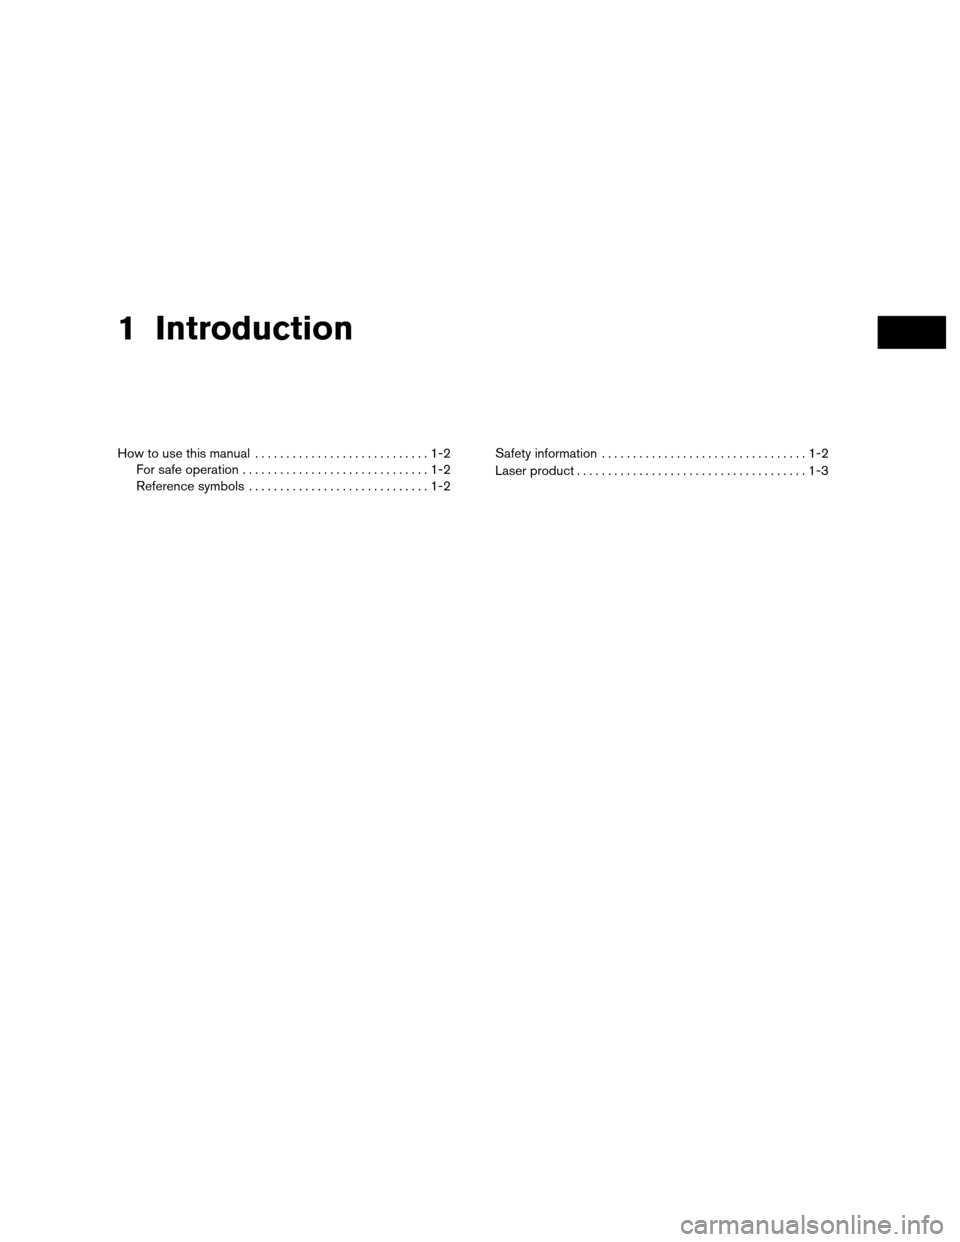 NISSAN SENTRA 2010 B17 / 7.G LC Navigation Manual 1 Introduction
How to use this manual............................1-2
For safe operation ..............................1-2
Reference symbols .............................1-2 Safety information
........